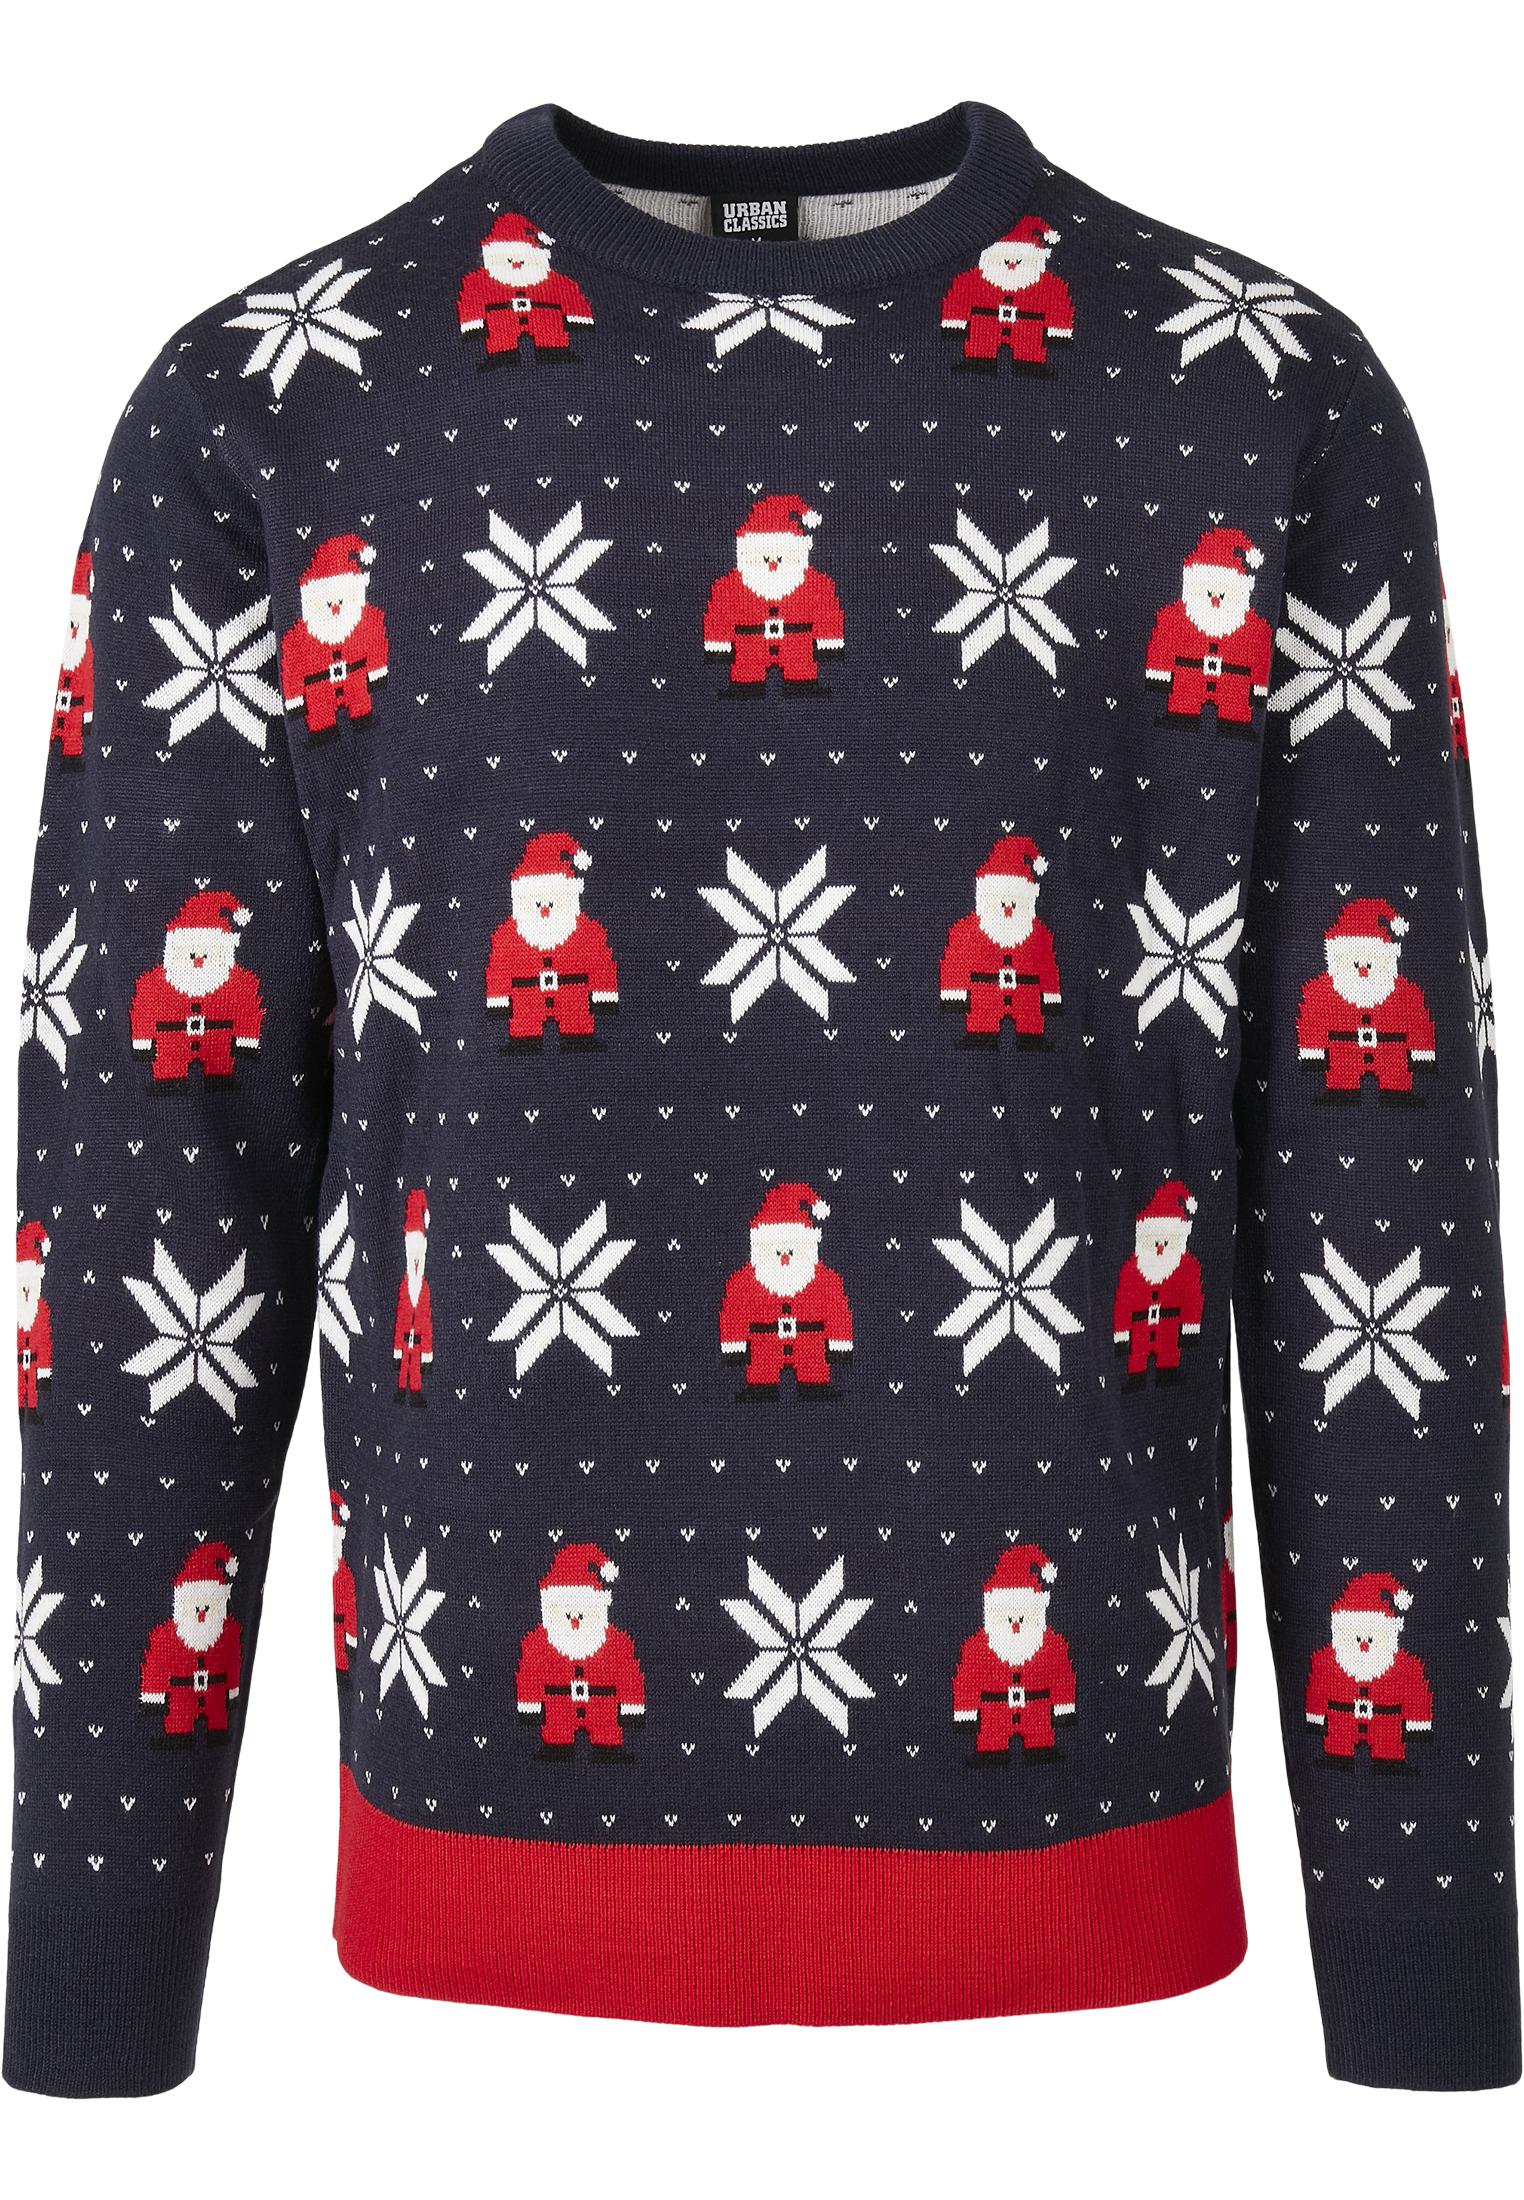 UC Men Nicolaus And Snowflakes Sweater (Farbe: nicolaus and snowflake aop / Größe: L)